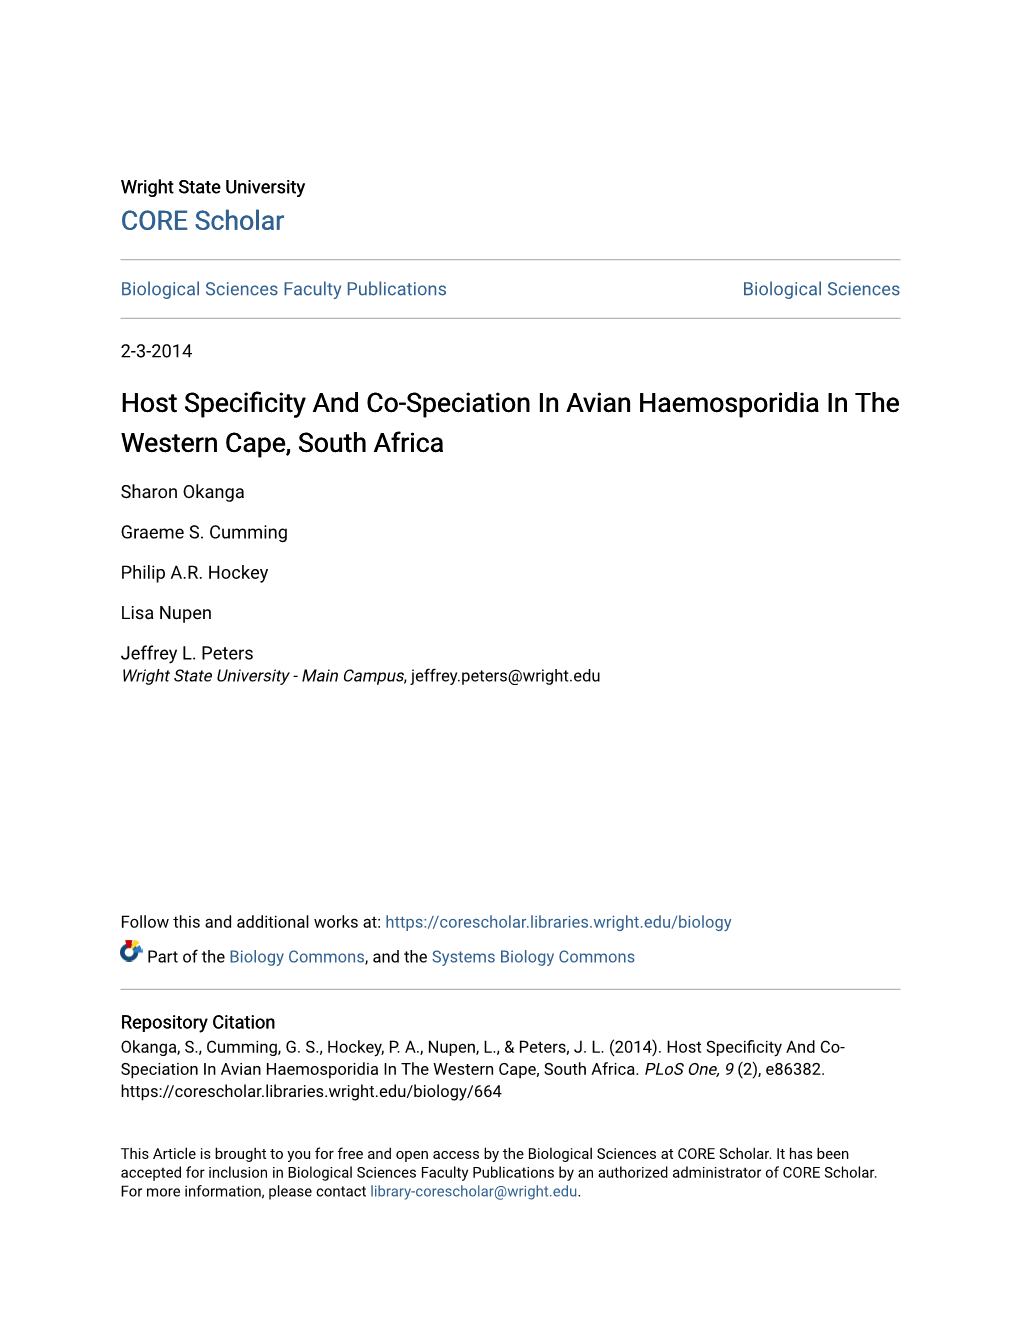 Host Specificity and Co-Speciation in Avian Haemosporidia in the Western Cape, South Africa